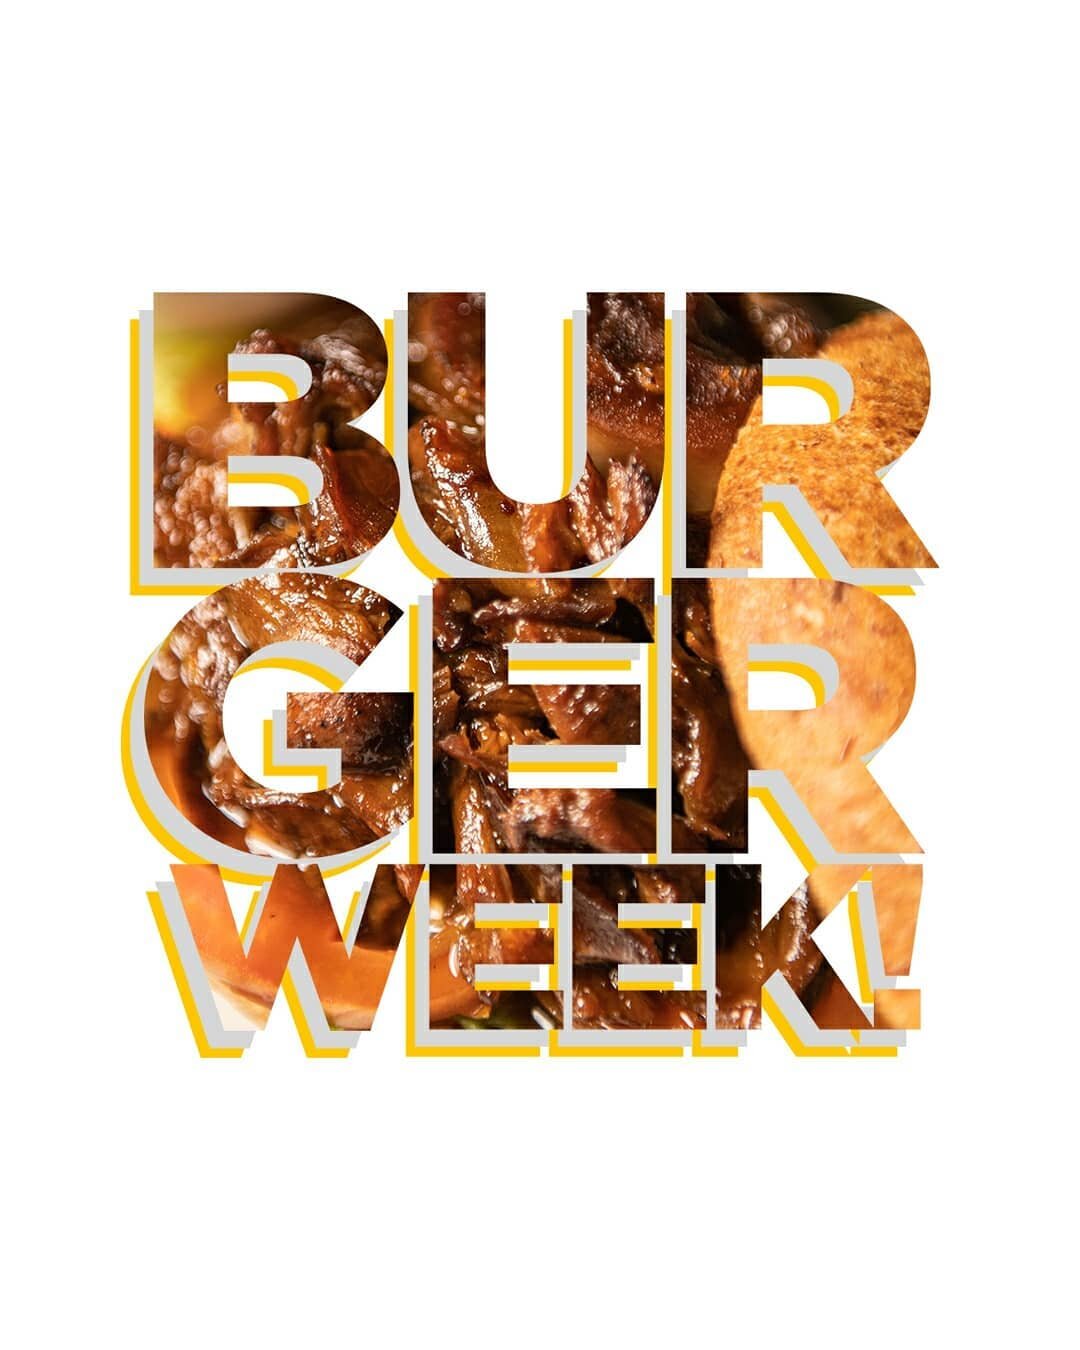 Buy 1 get 1 FREE... After all...&ldquo;A burger a day keeps the hunger away!!!&rdquo;

To book; visit our website or call +254790999149

#UrbanEatery
#theurbanexprience
#NBW2021
#BurgerWeek